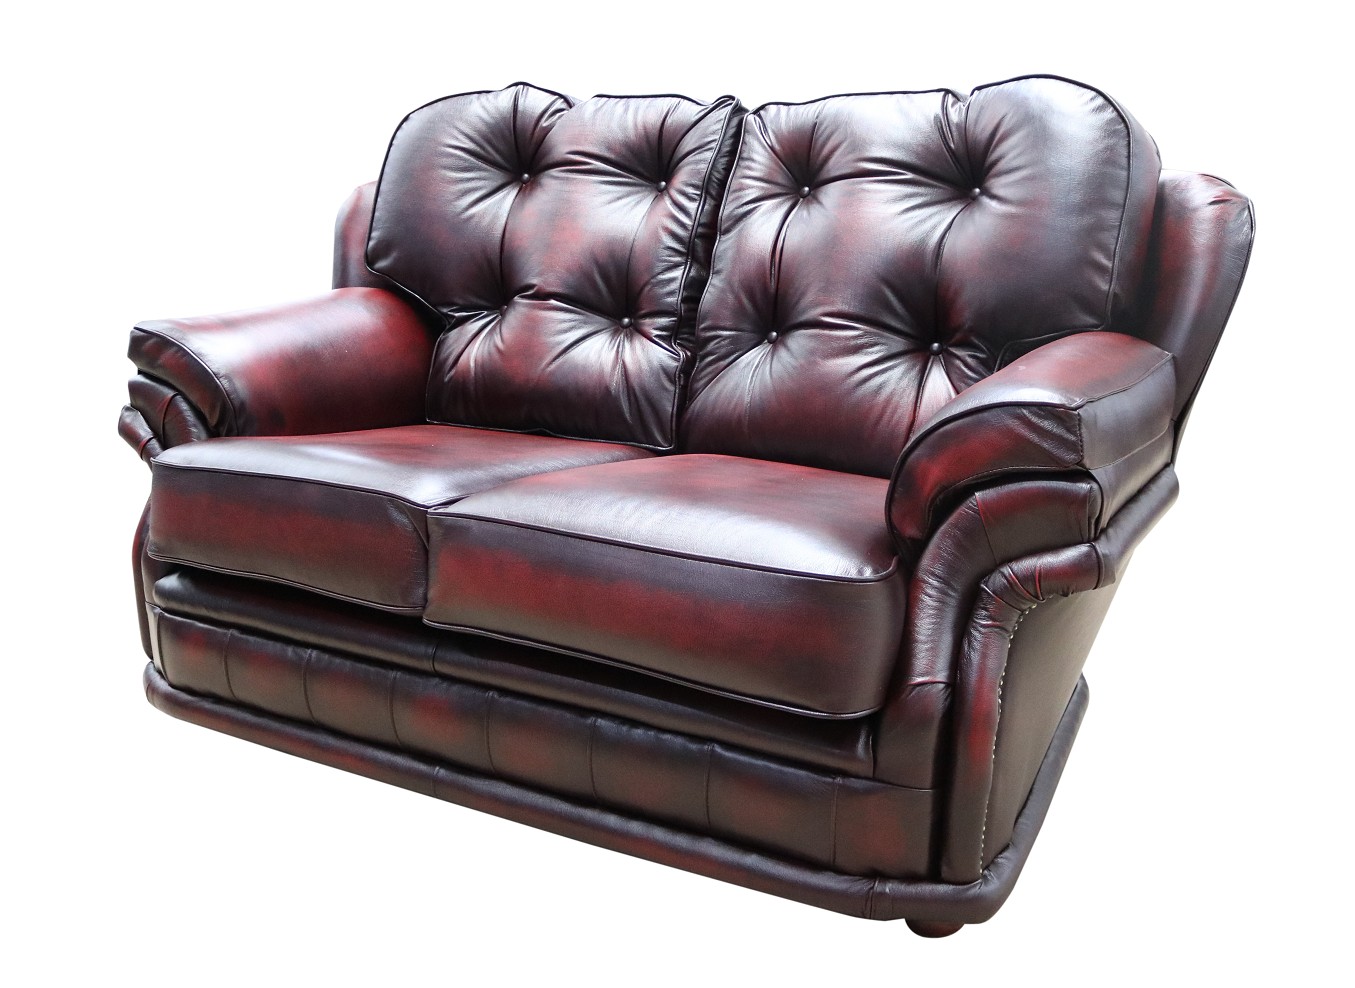 Product photograph of Chesterfield 2 Seater Antique Oxblood Red Leather Sofa Bespoke In Knightsbr Idge Style from Chesterfield Sofas.